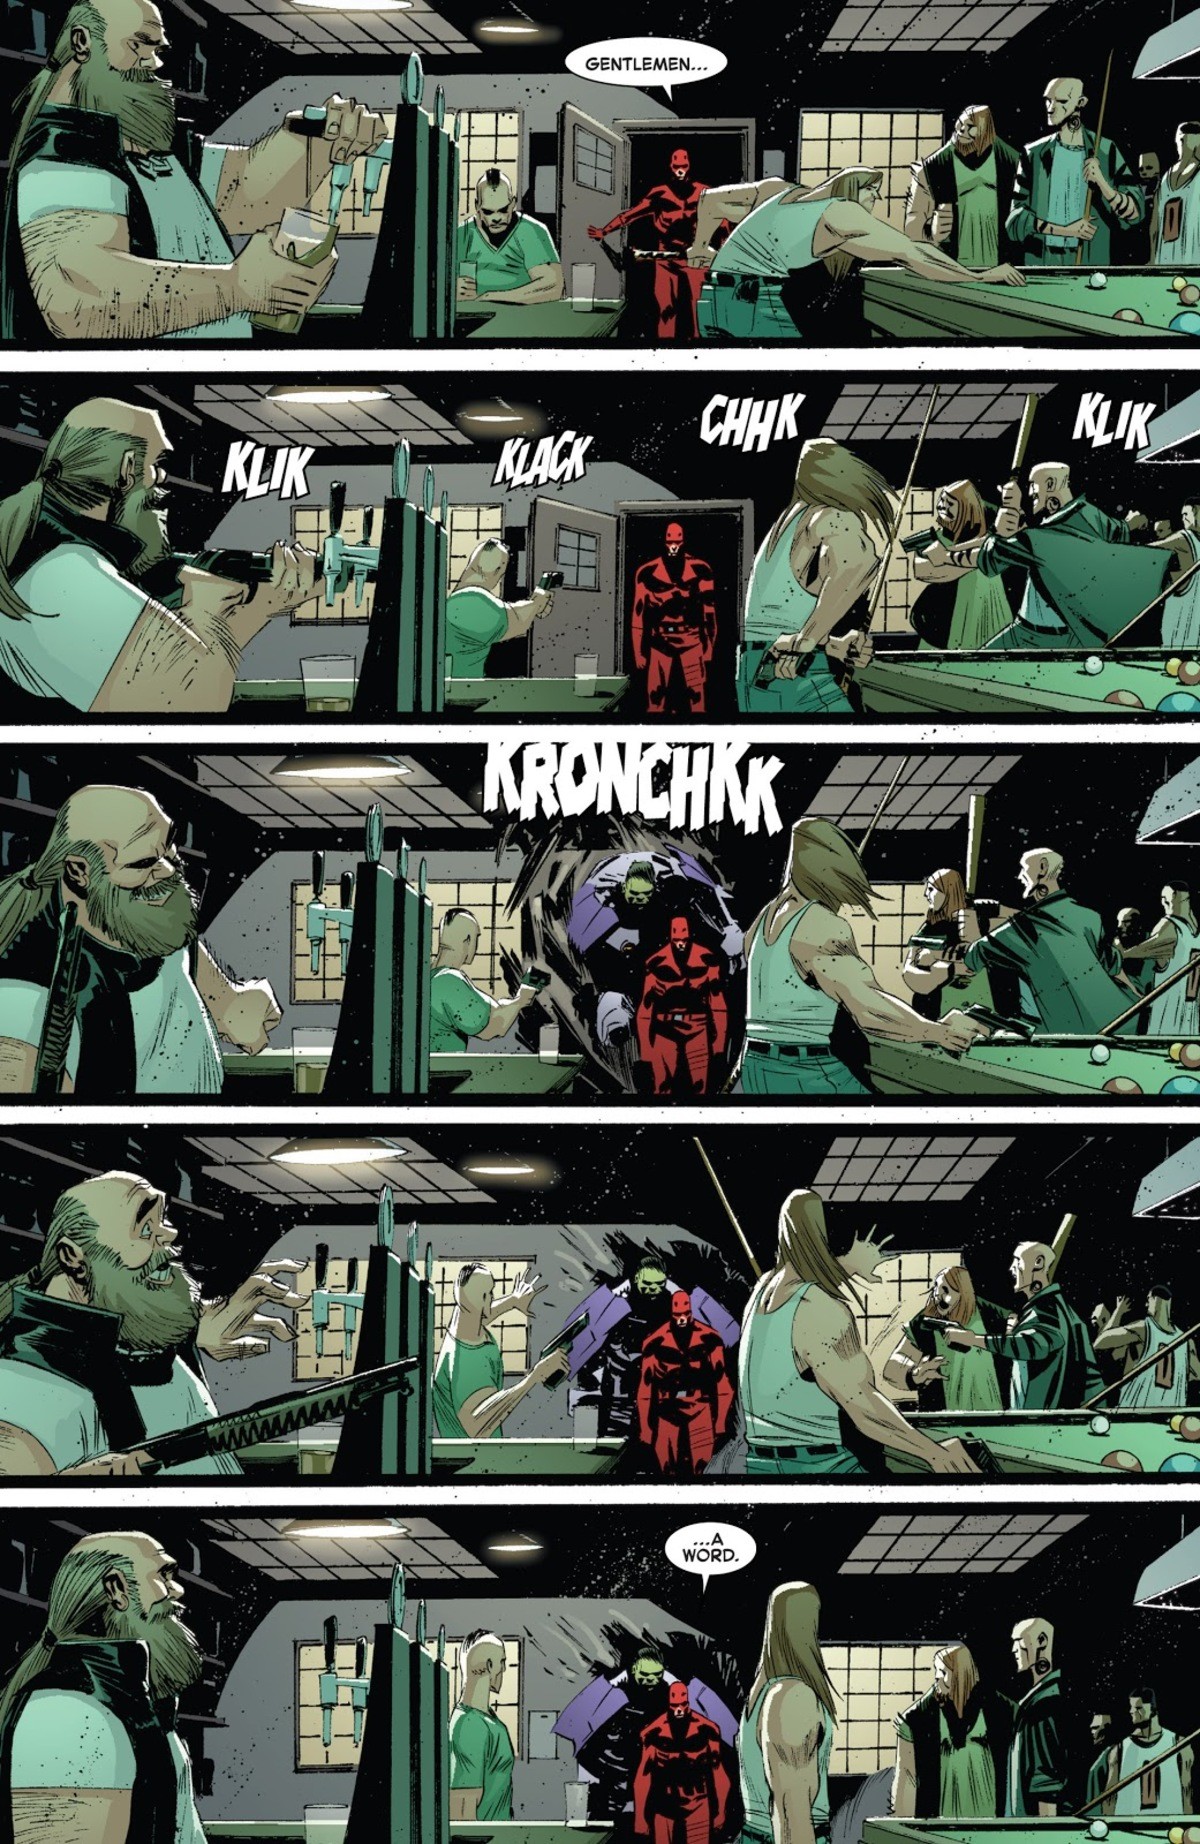 Two superheroes walk into a bar.... Indestructible Hulk Issue #9 .. I mean, sure Daredevil is just a man but wouldn't they know enough about him to not wanna get their asses kicked by him either?